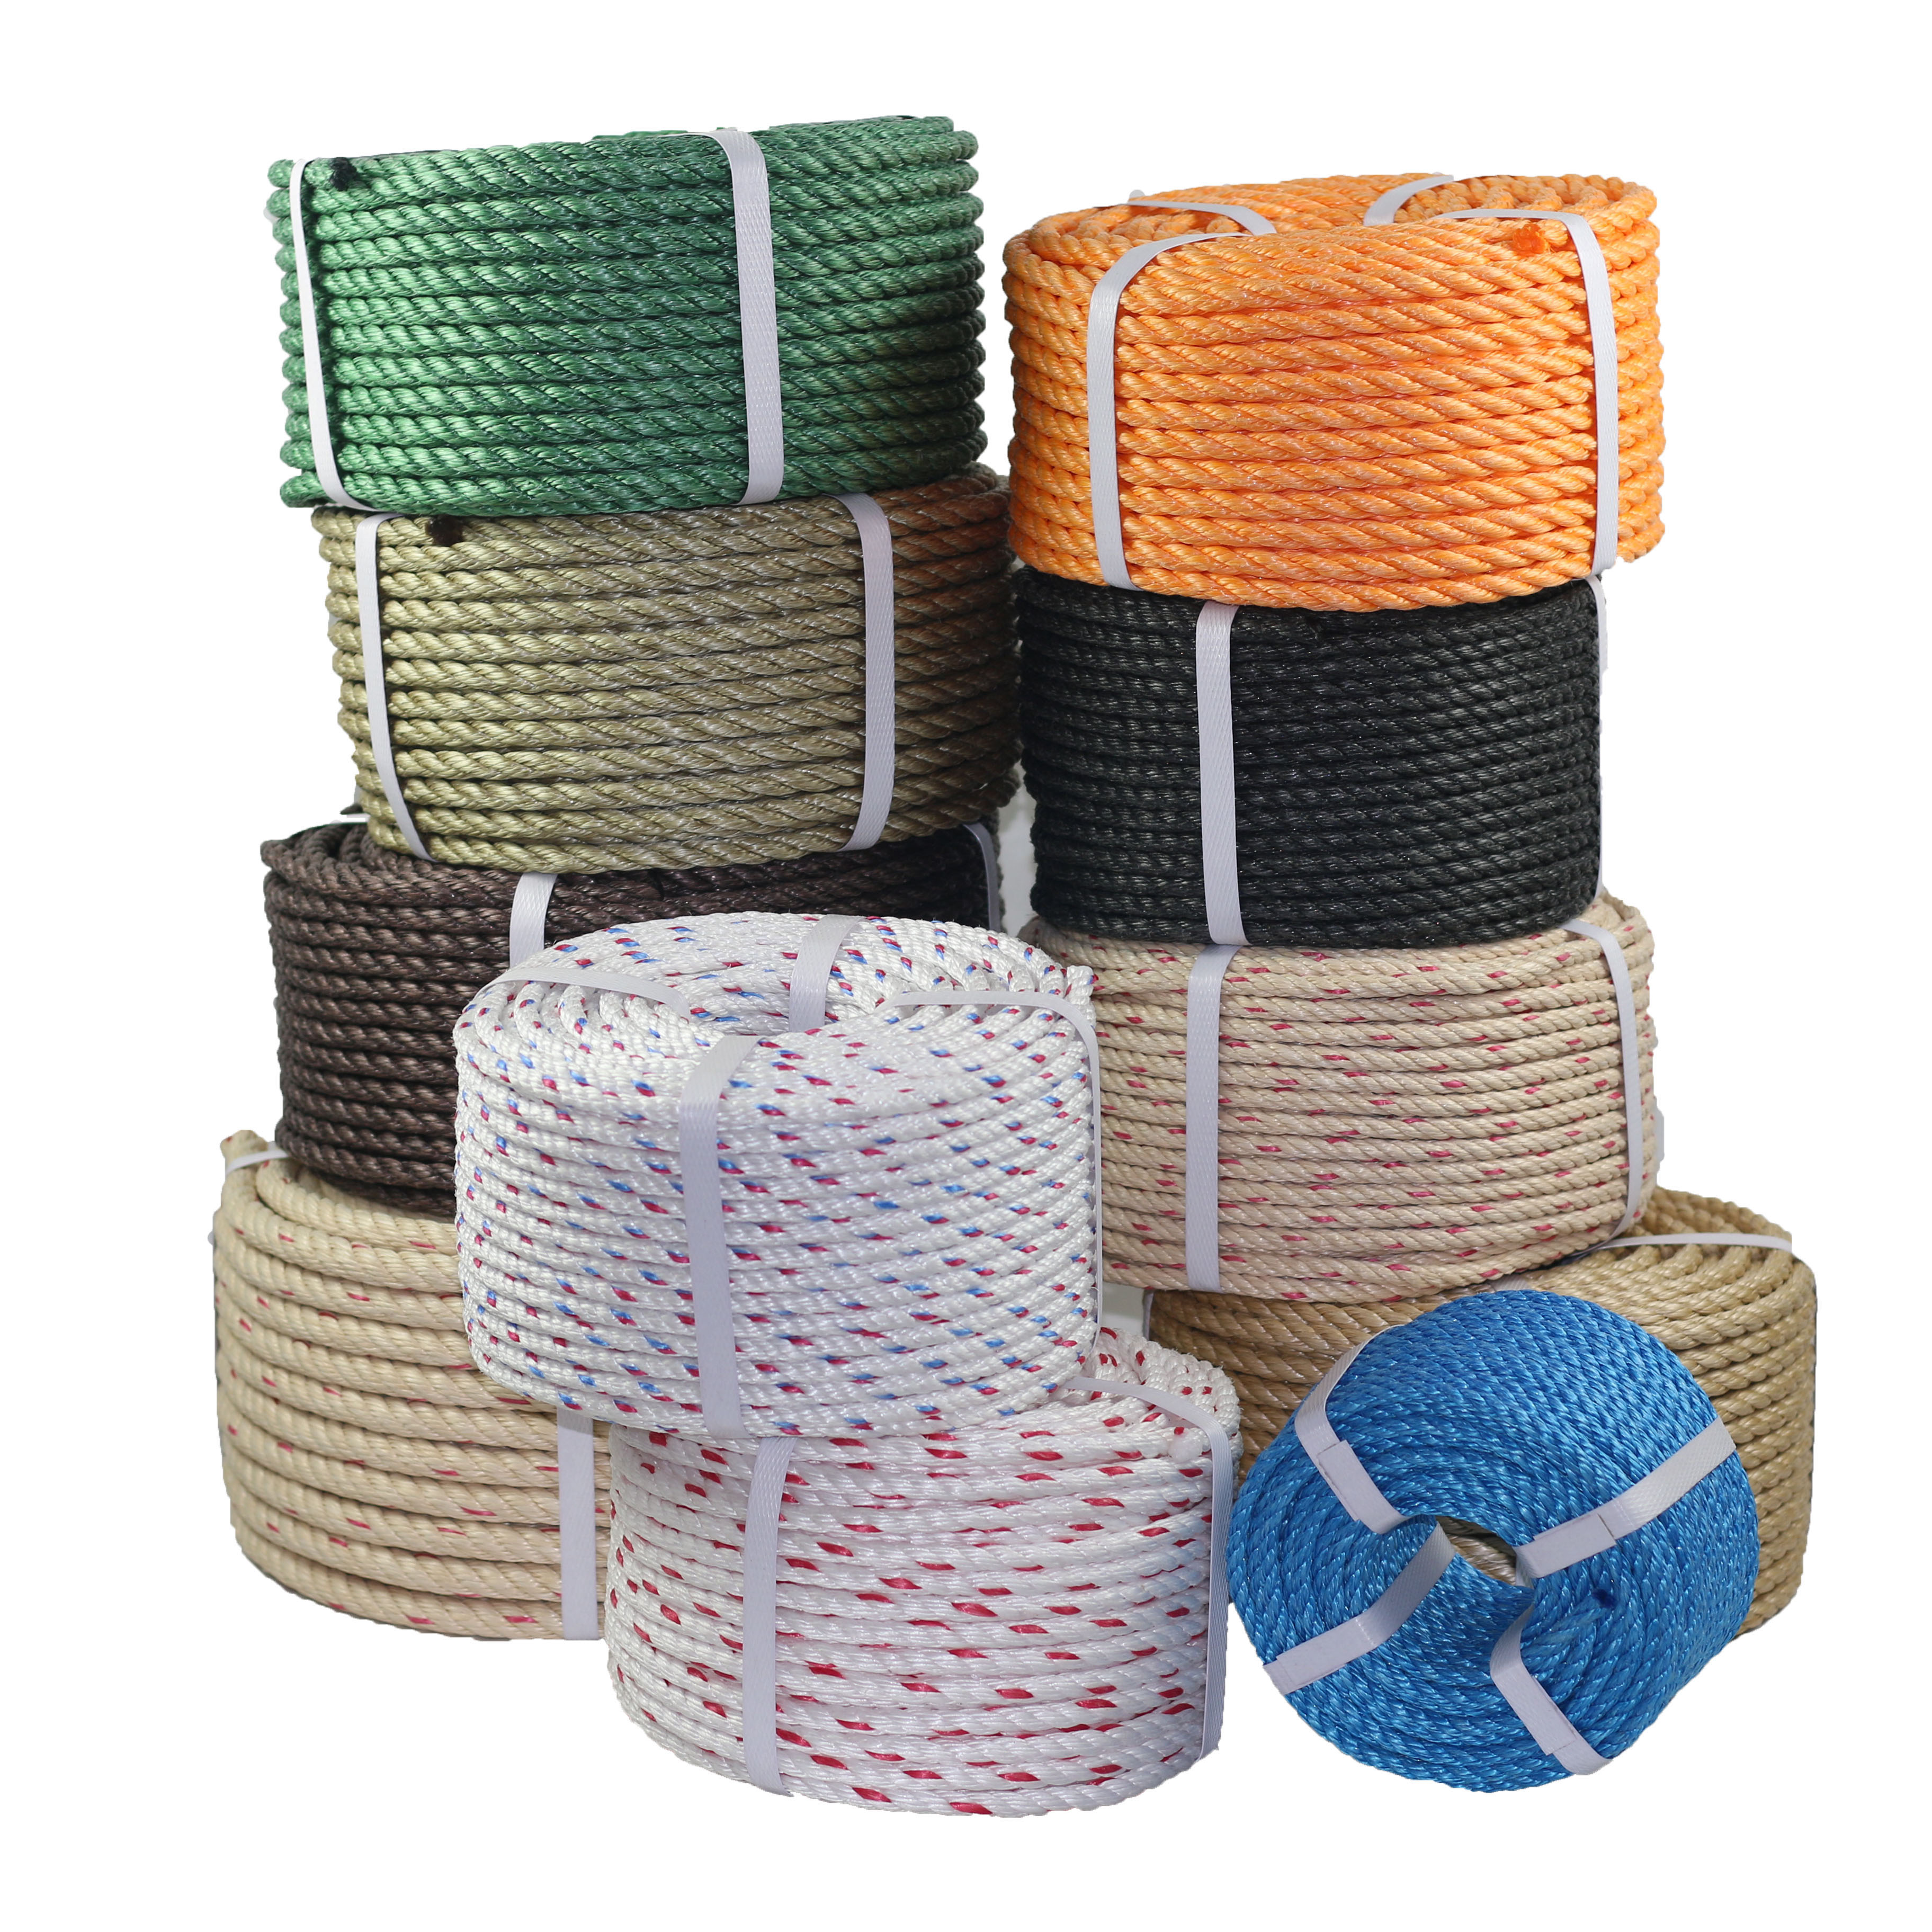 High-Quality Rope Products Made in China